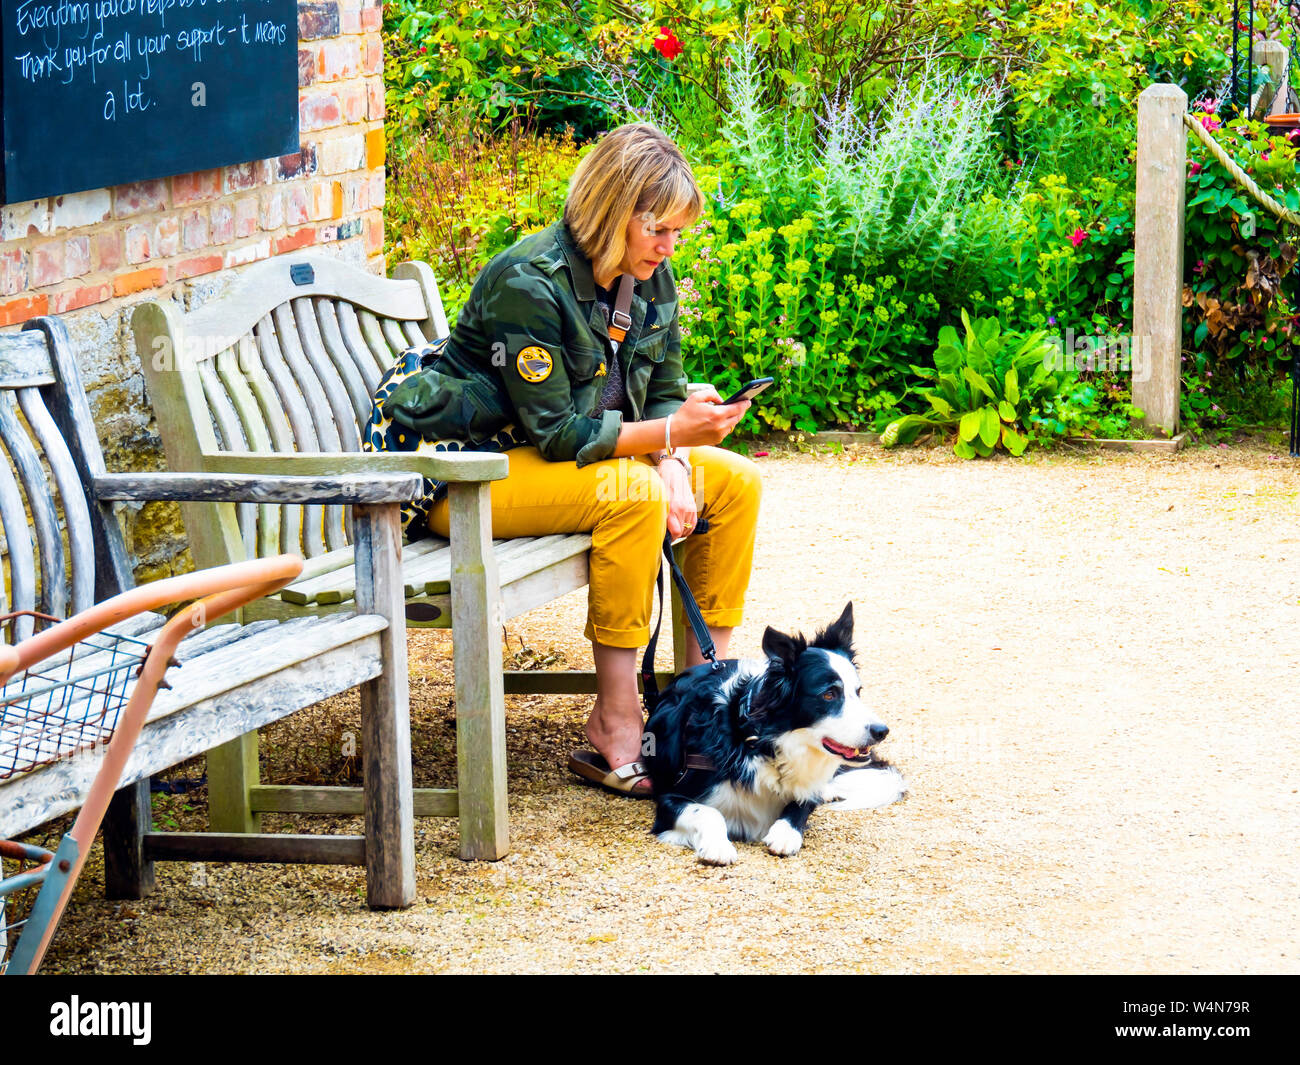 Helmsley Walled Garden a smartly dressed young woman seated and using a mobile phone with an alert collie dog Stock Photo